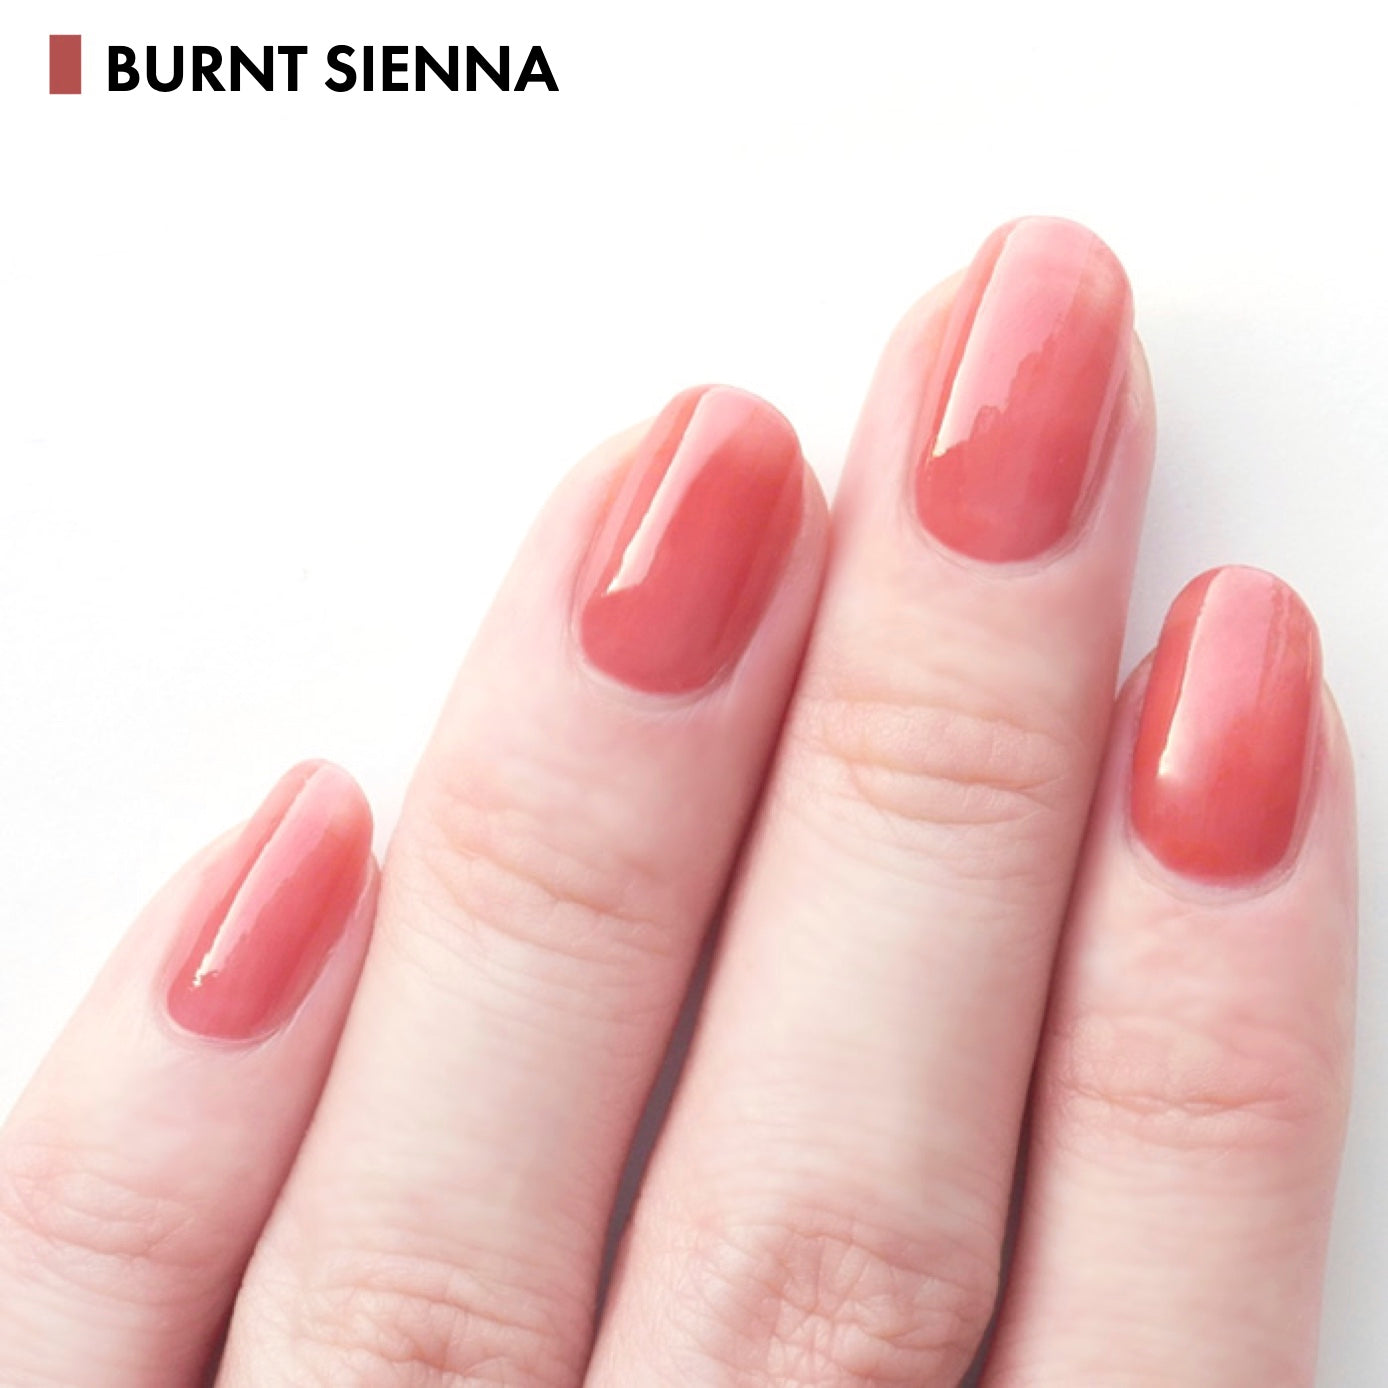 Nail cover hardener nail care polish with elegant pinkish red "Burnt Sienna". Branded by HOMEI Weekly Gel. Free from 12 harsh ingredients so we name this 12FREE.